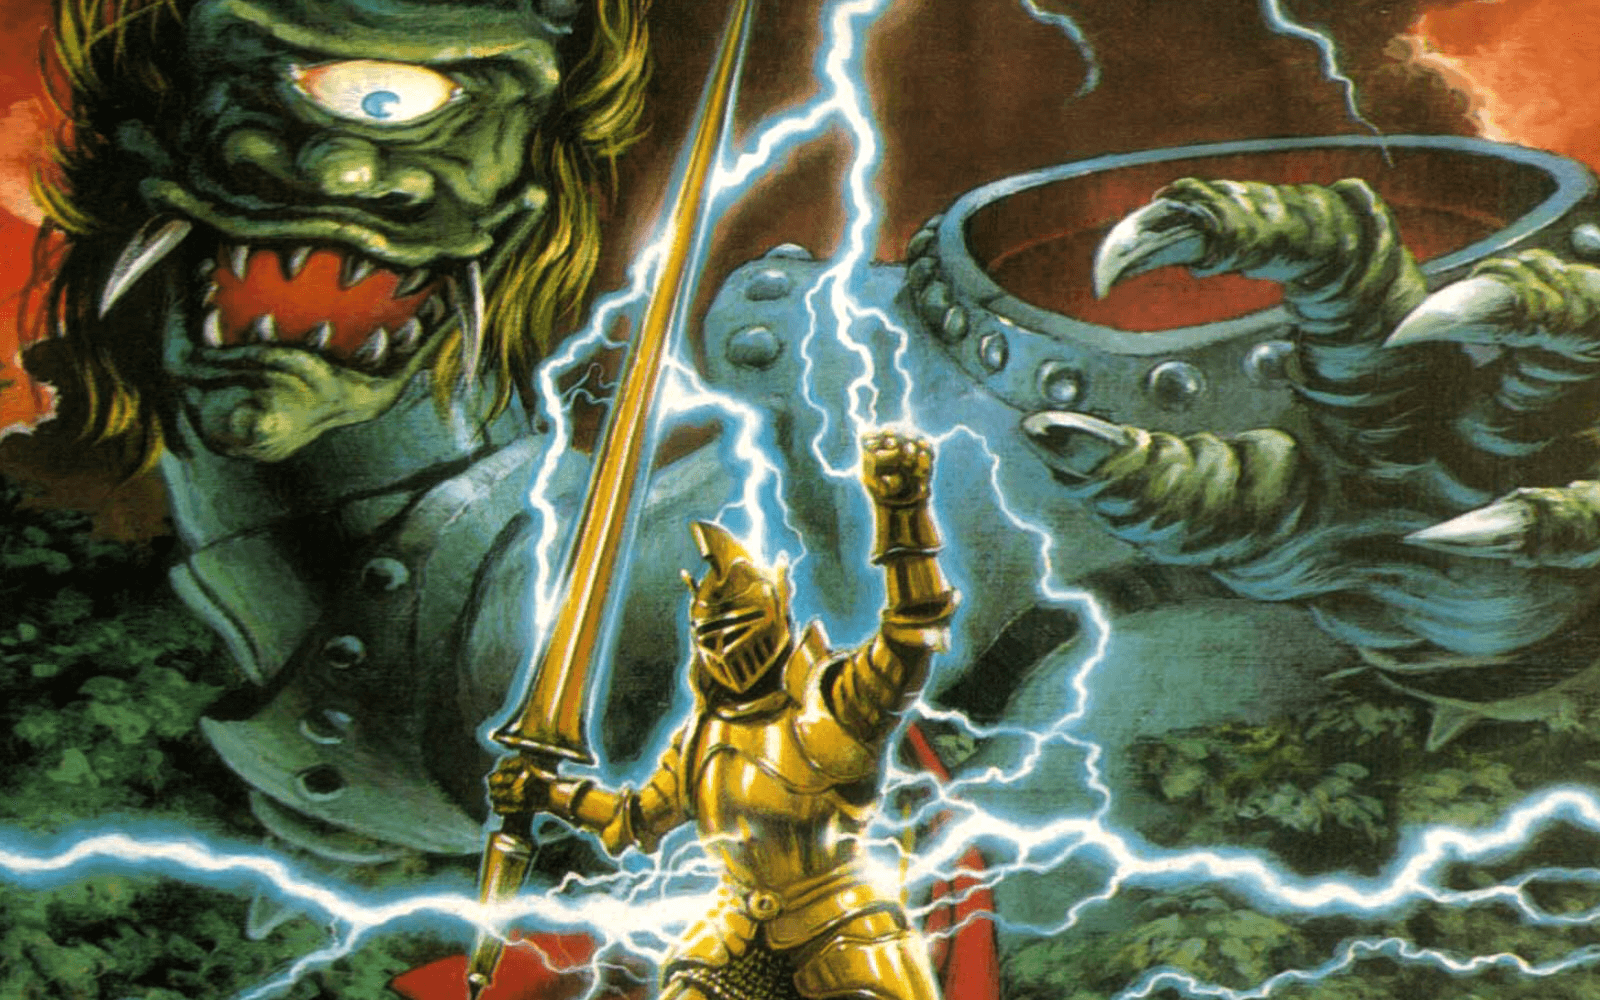 Ghouls 'n Ghosts - The Cane and Rinse videogame podcast